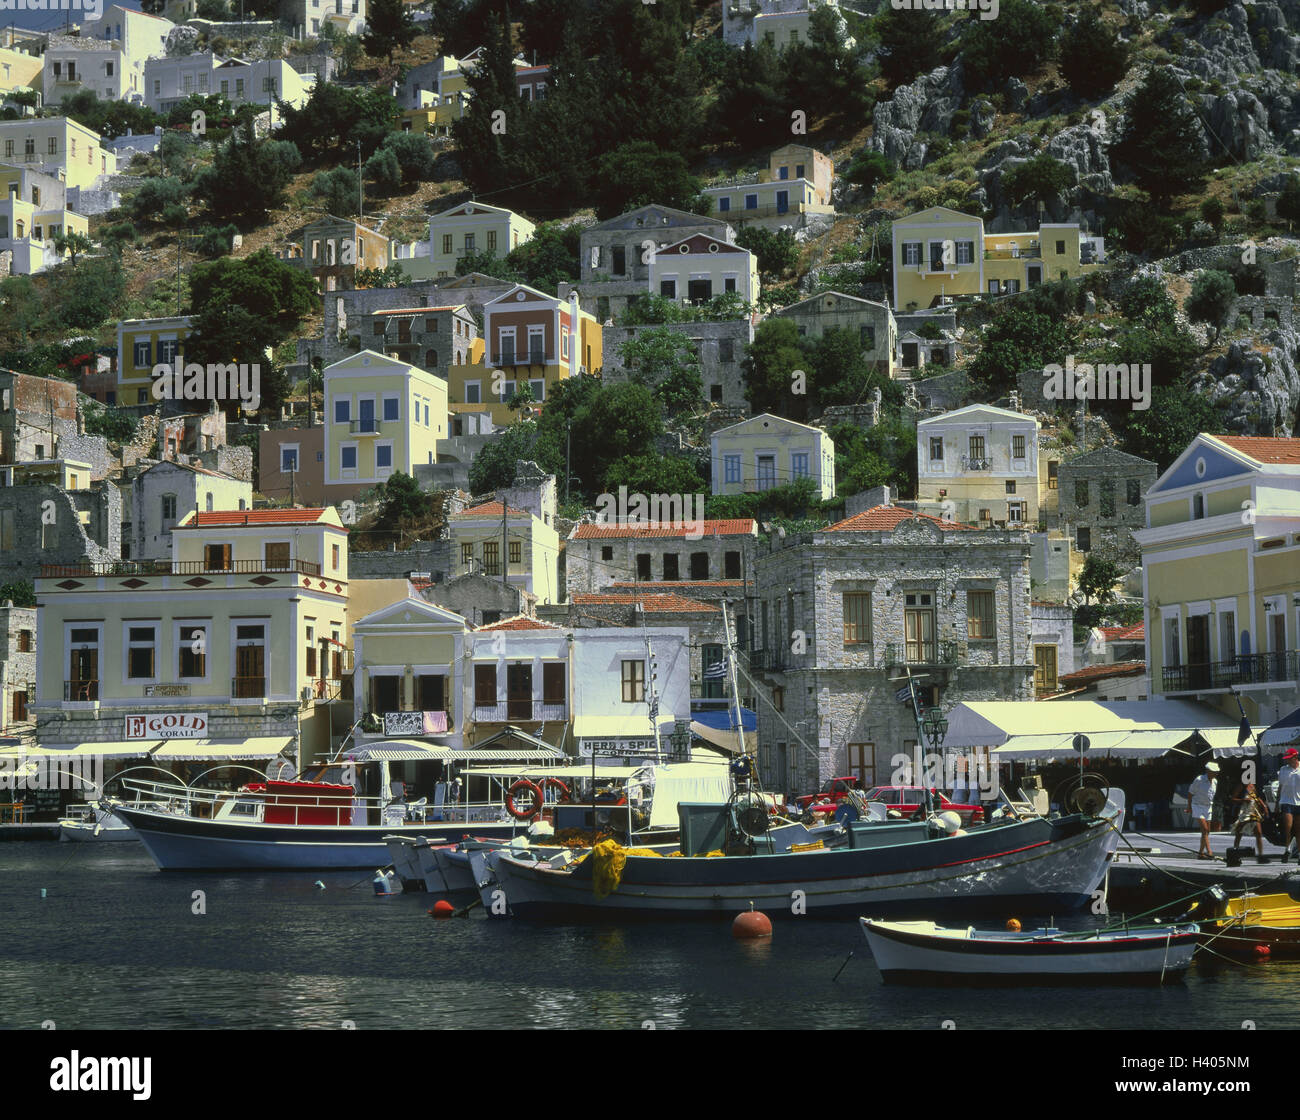 Greece, island, Symi, town view, harbour, Dodekanes, island, Simi, view, fishing boats, boots Stock Photo